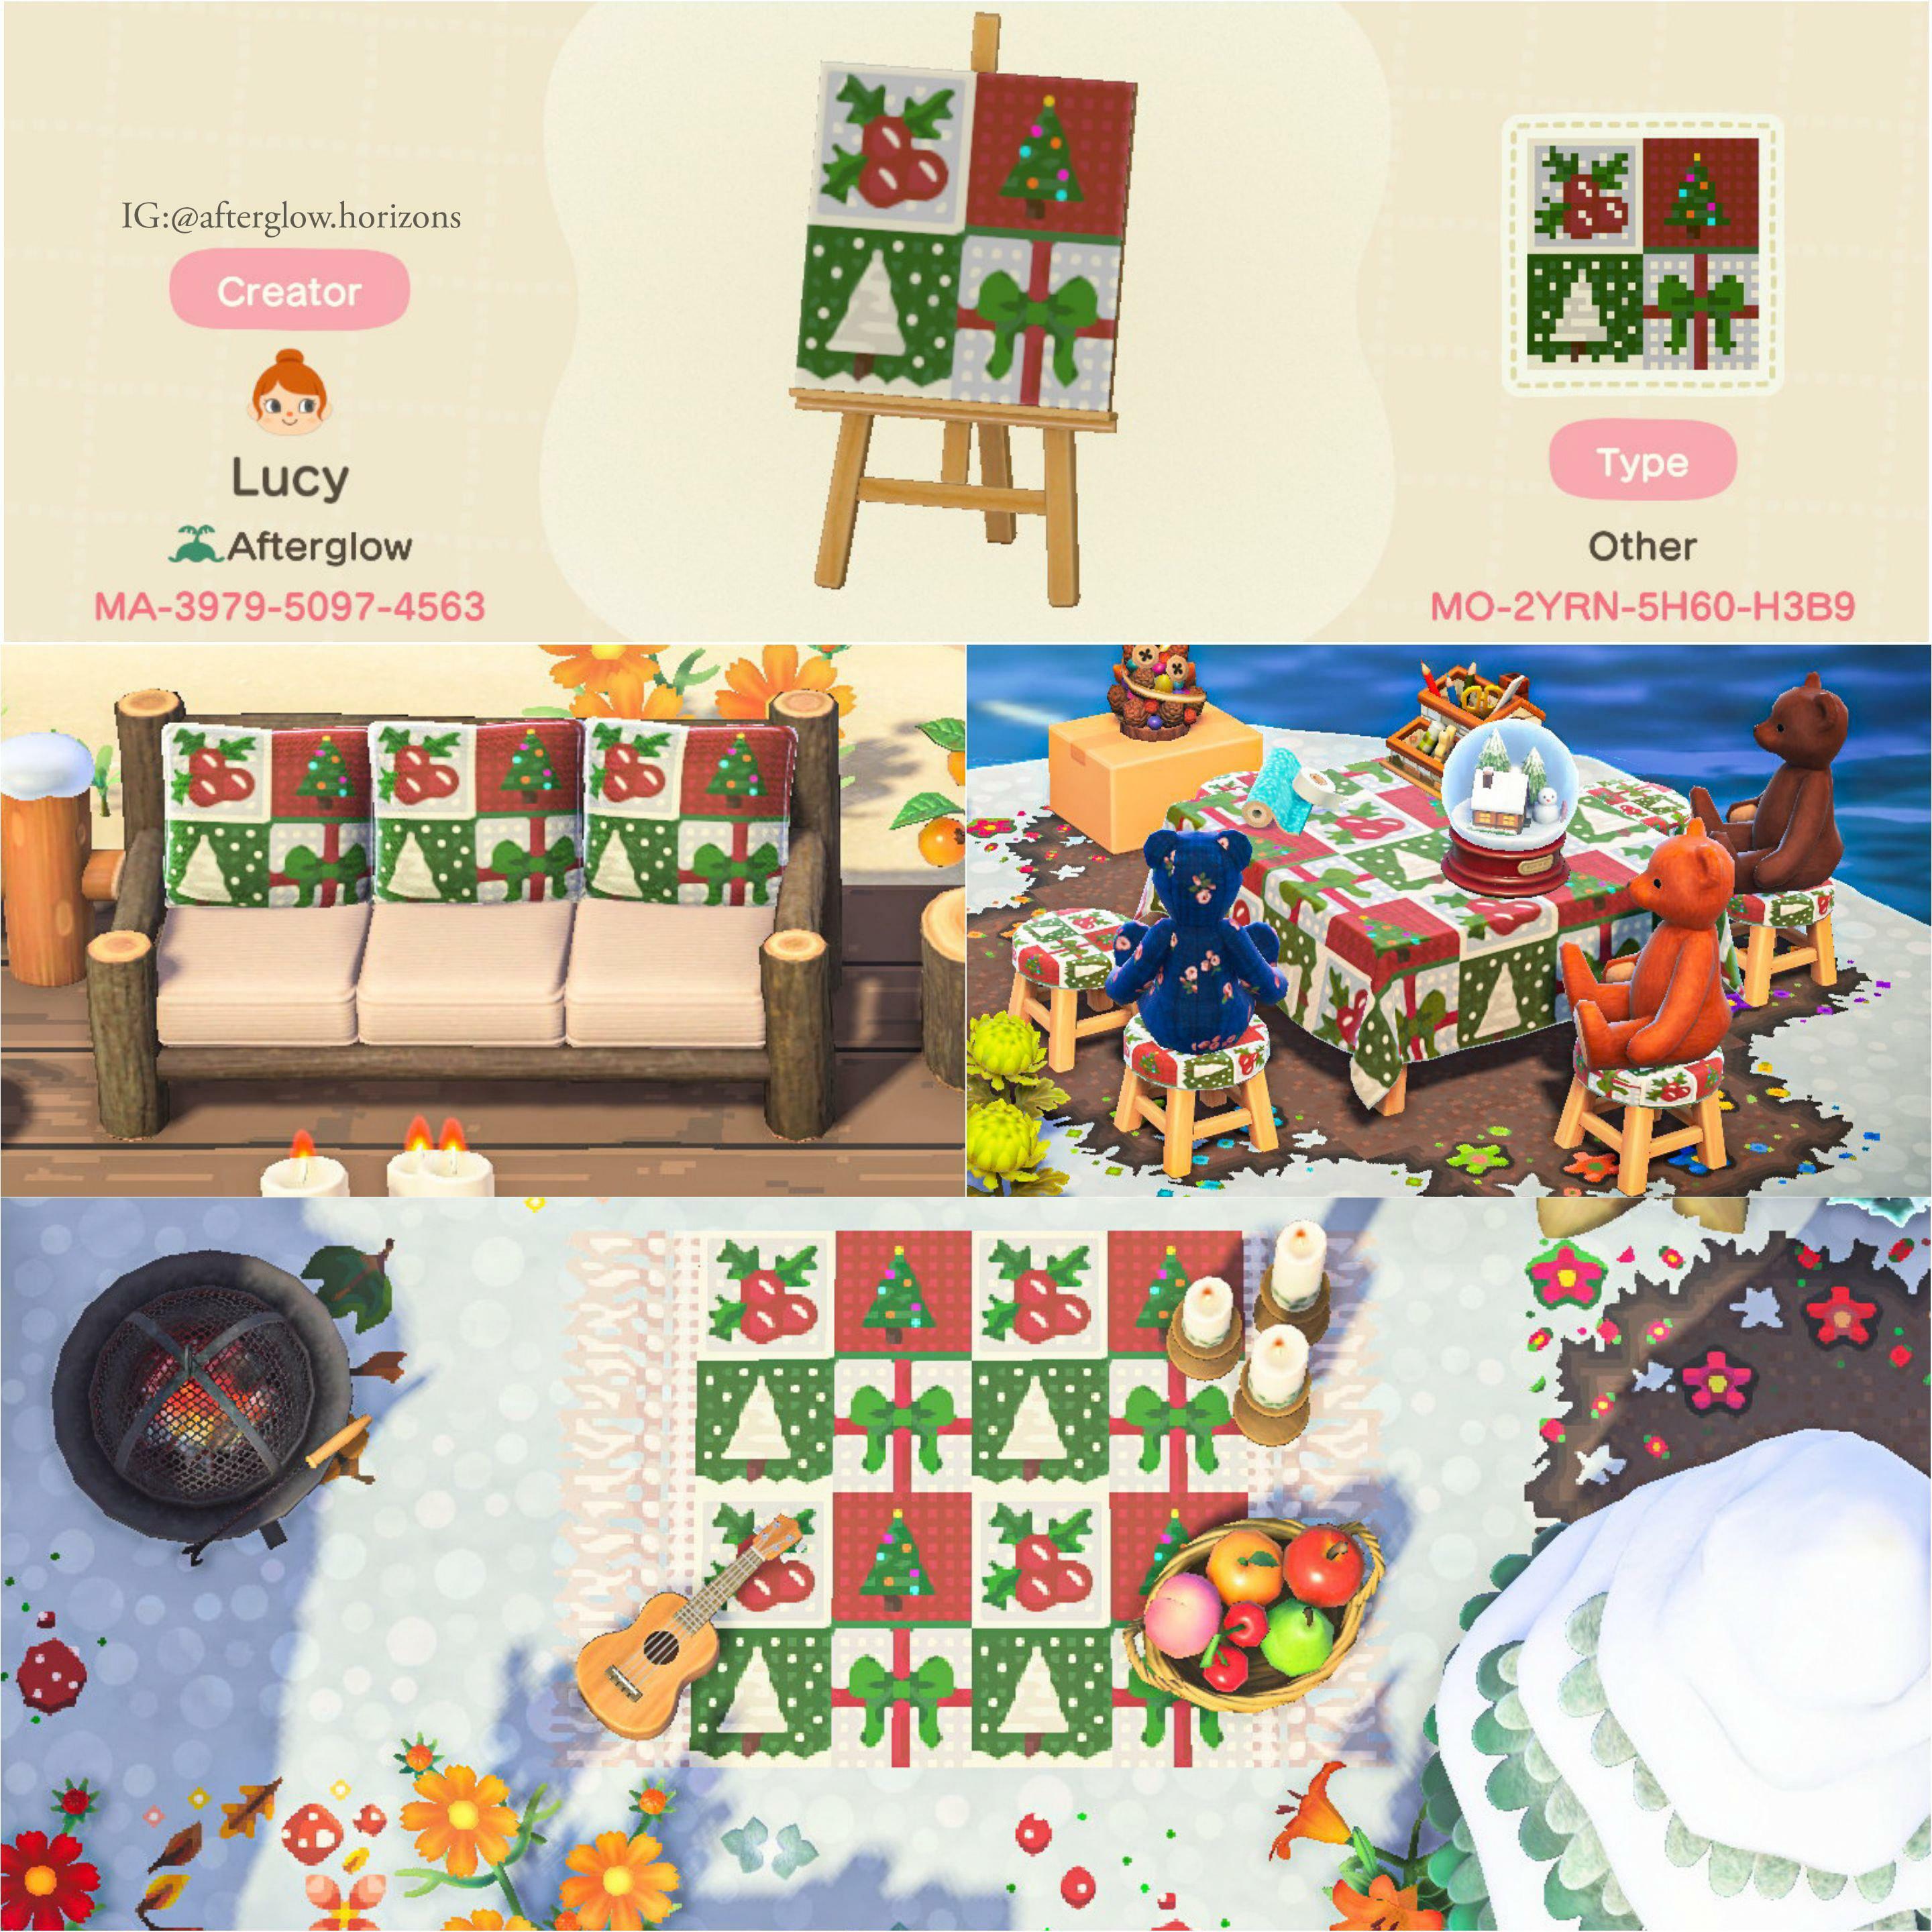 Animal Crossing New Horizons Players Are Already Putting Up Christmas